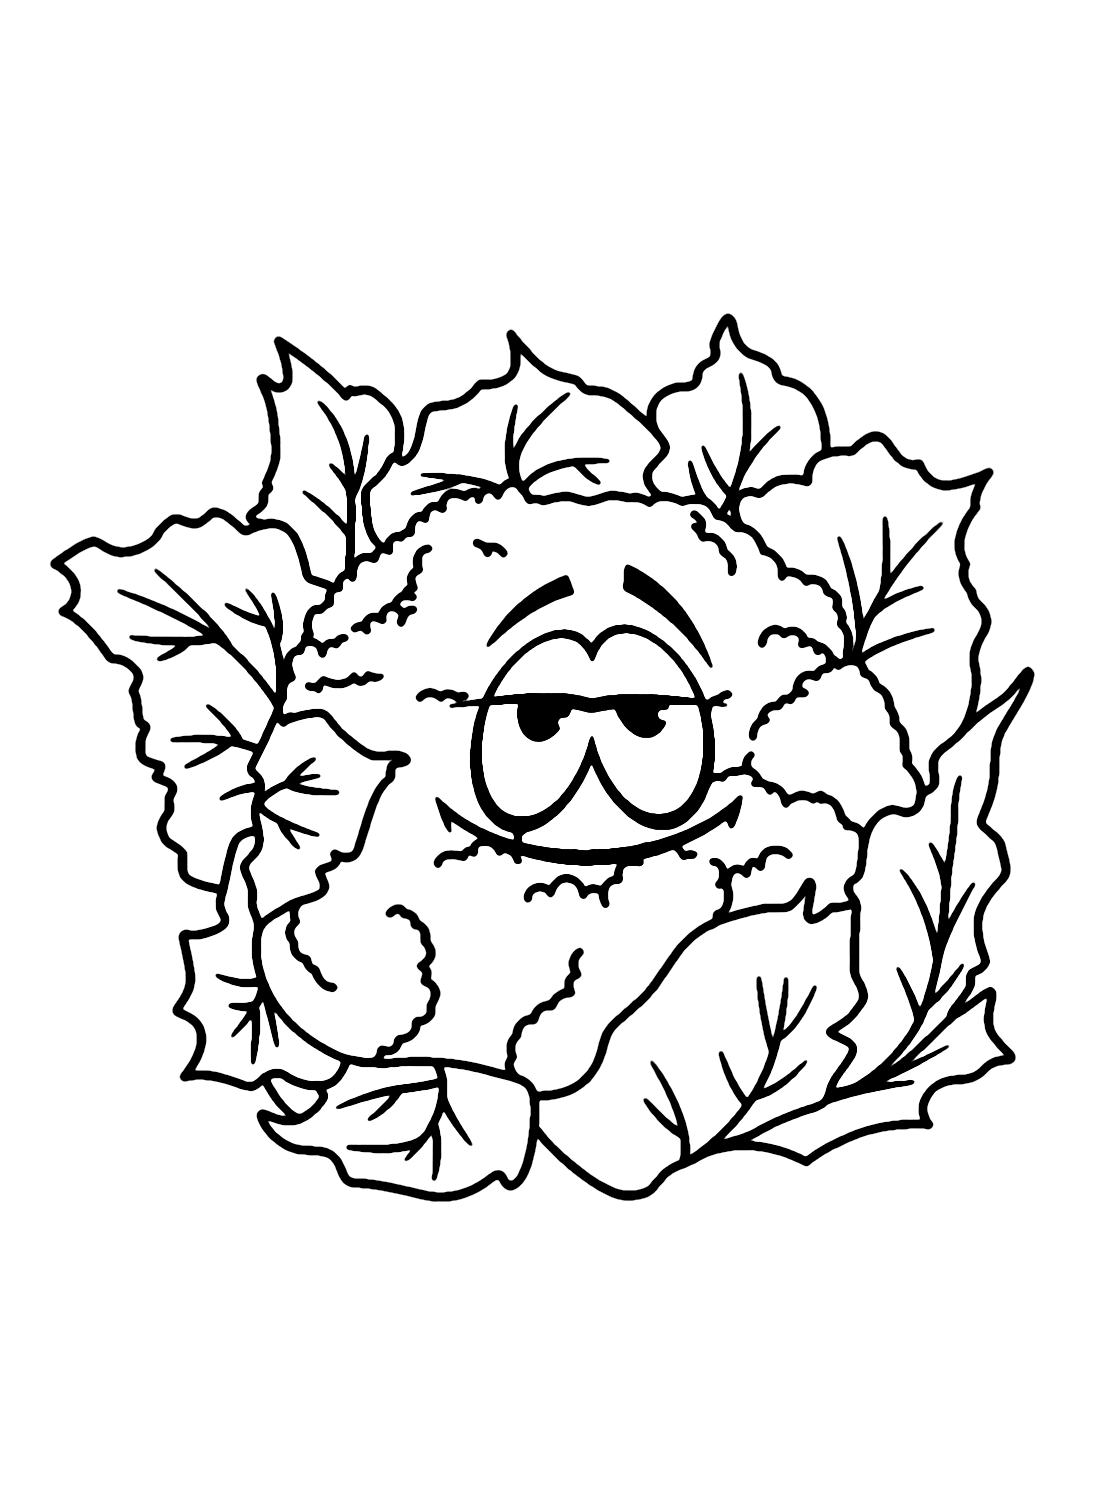 Cauliflower to Print Coloring Page